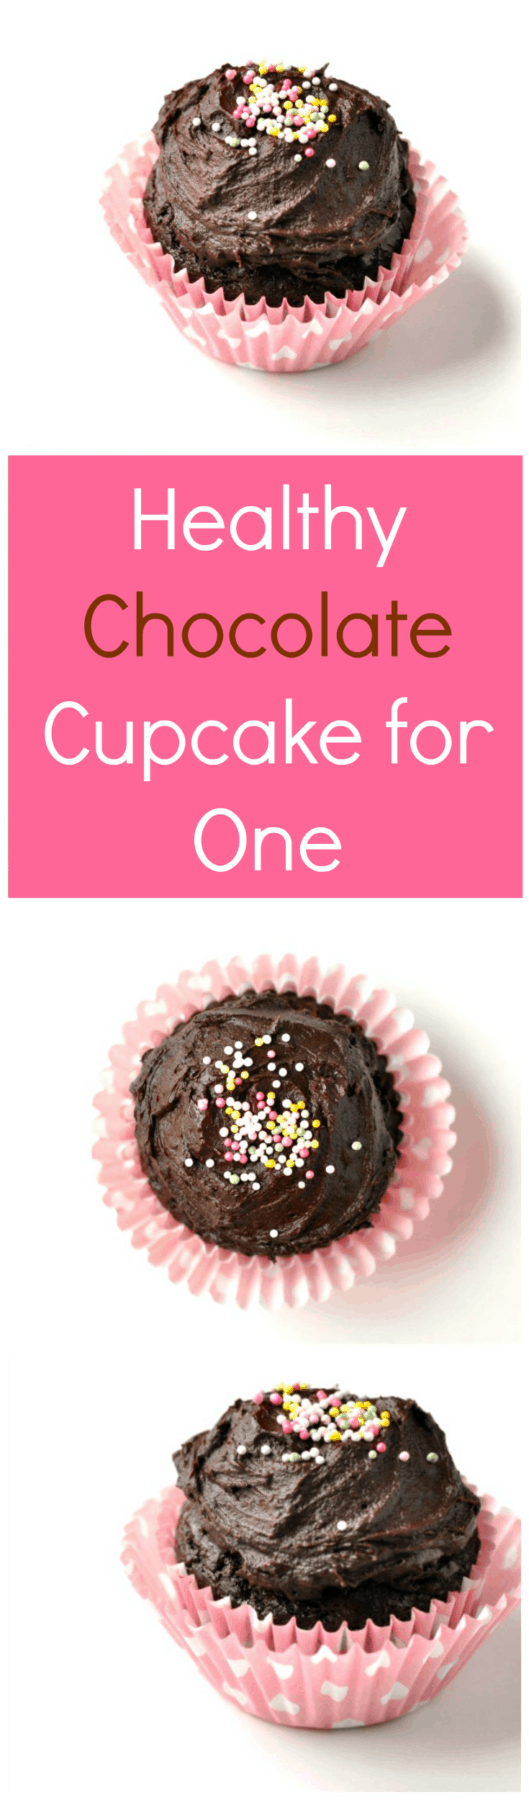 Healthy Chocolate Cupcake for One Recipe | this healthy one-bowl single-serving chocolate cake is going to become your new favorite dessert recipe of all time! It's so rich and chocolatey, you'd never know it's a healthy dessert recipe.